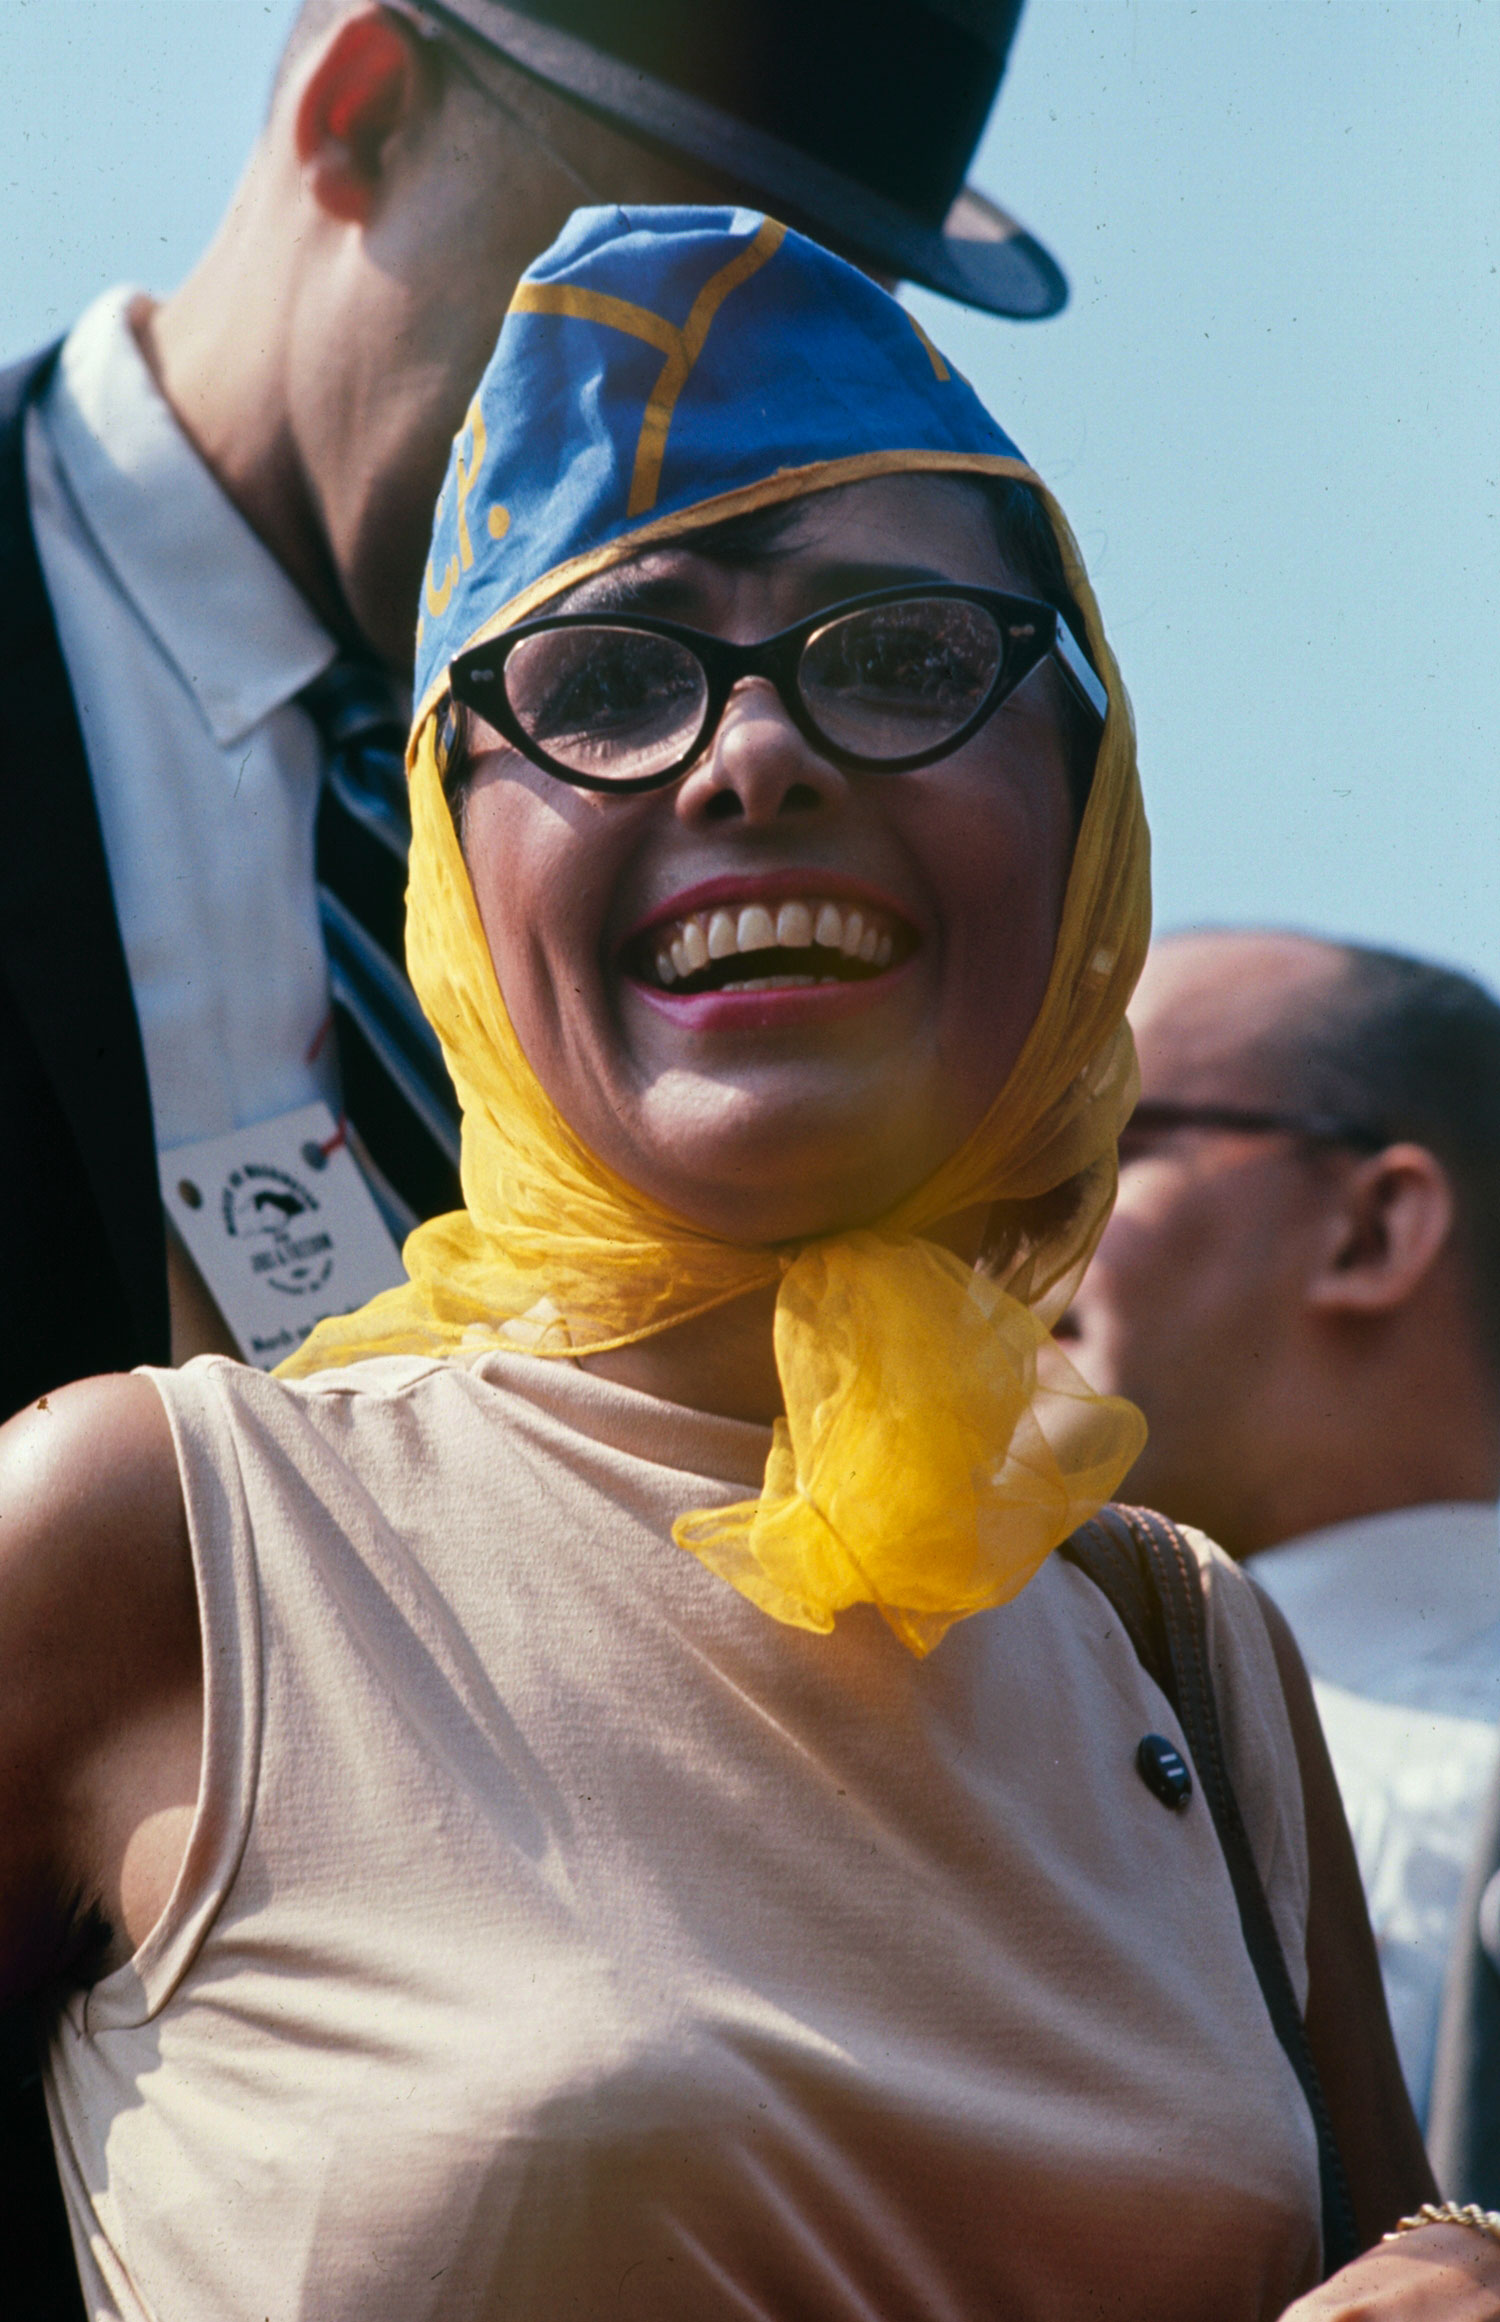 Lena Horne at the March on Washington for Jobs and Freedom, August 28, 1963.